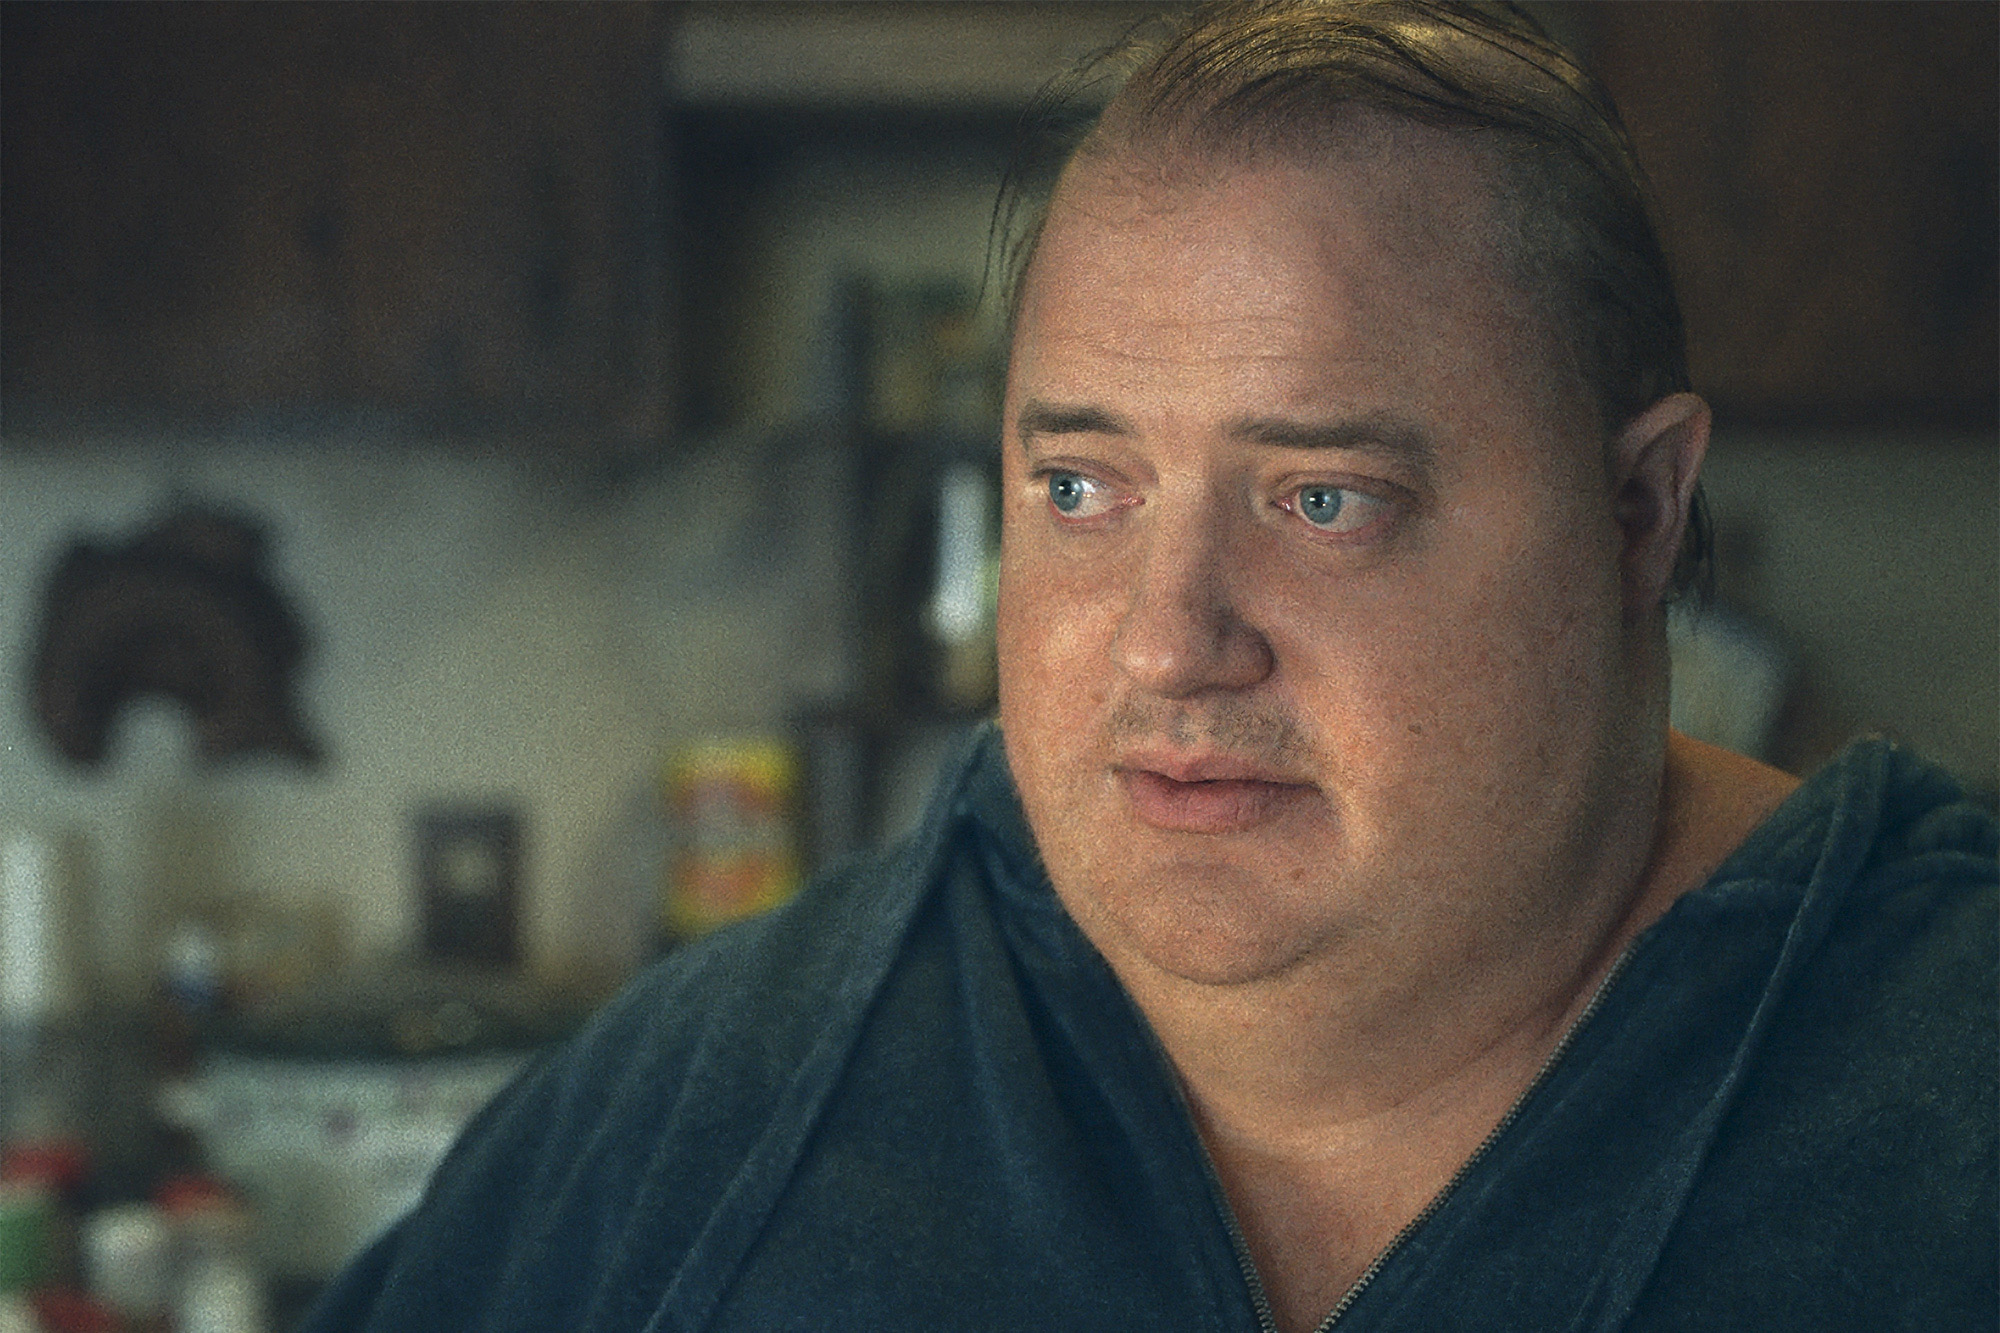 Brendan Fraser as "Charlie" in a still image from the acclaimed 2022 film "The Whale"